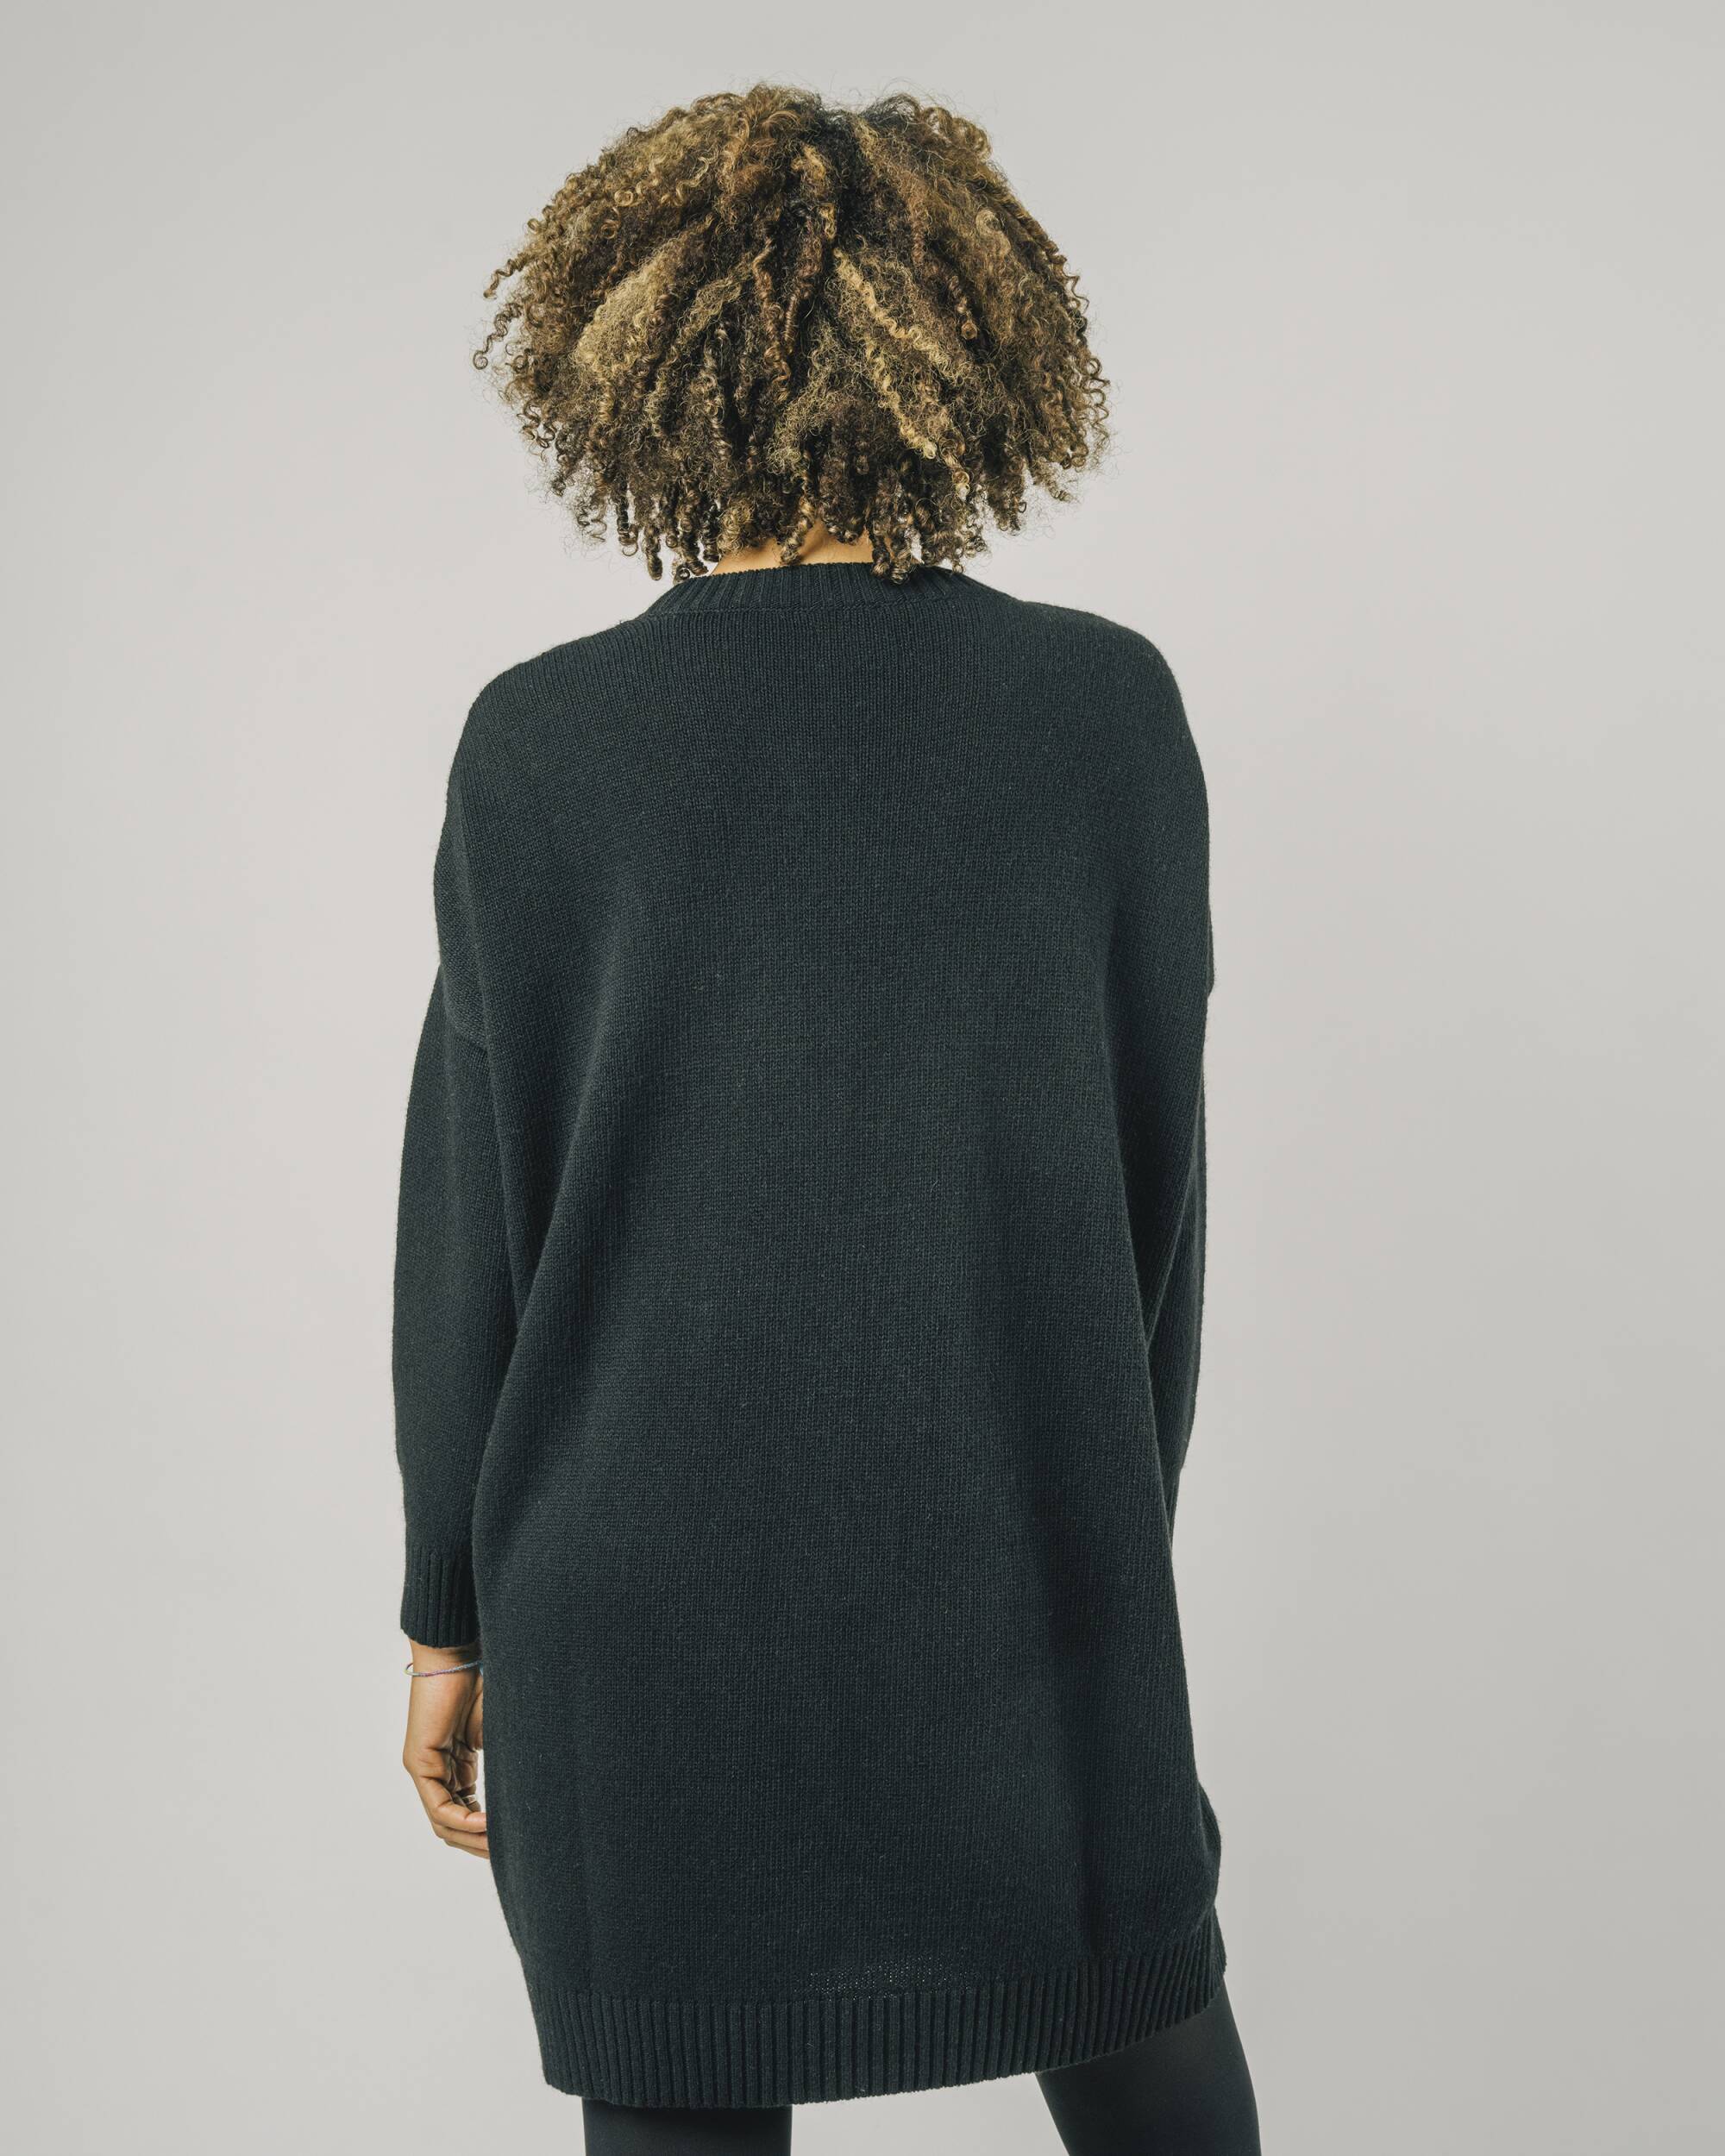 Black dress made from recycled cashmere, recycled wool, recycled polyamide and lyocell from Brava Fabrics